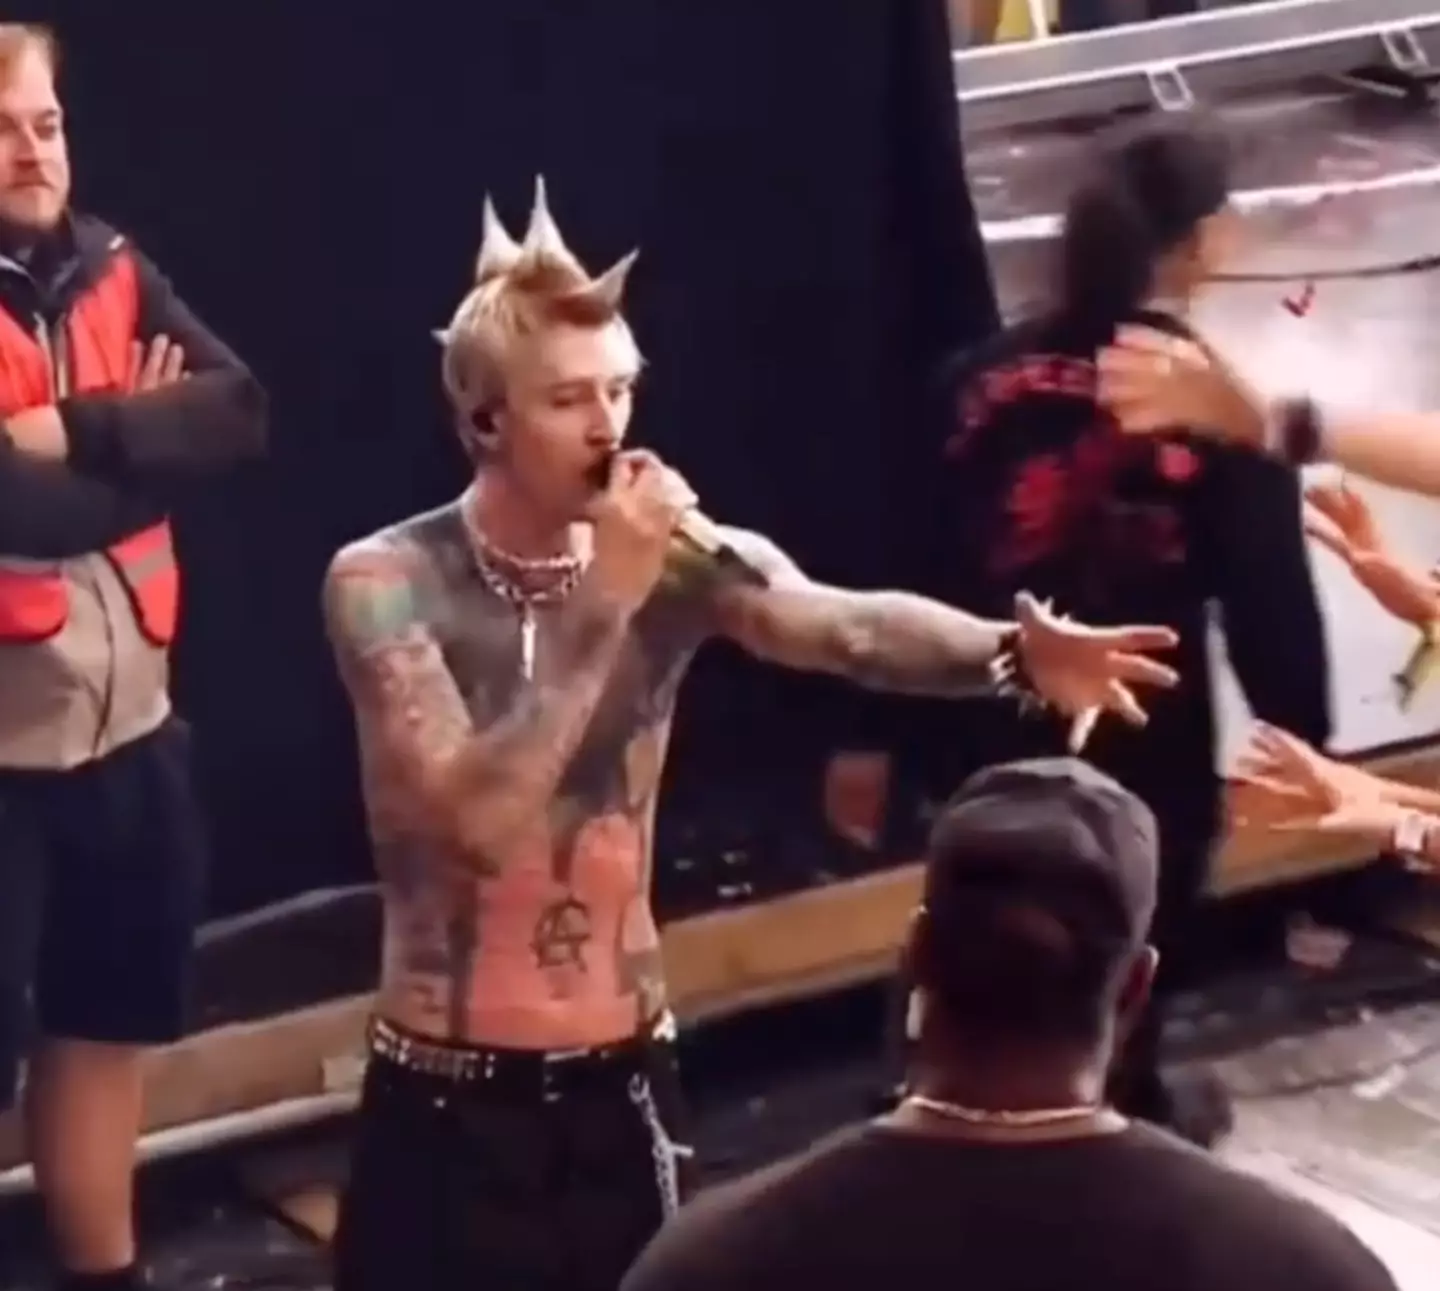 The fan has since thanked MGK for making his dream come true.